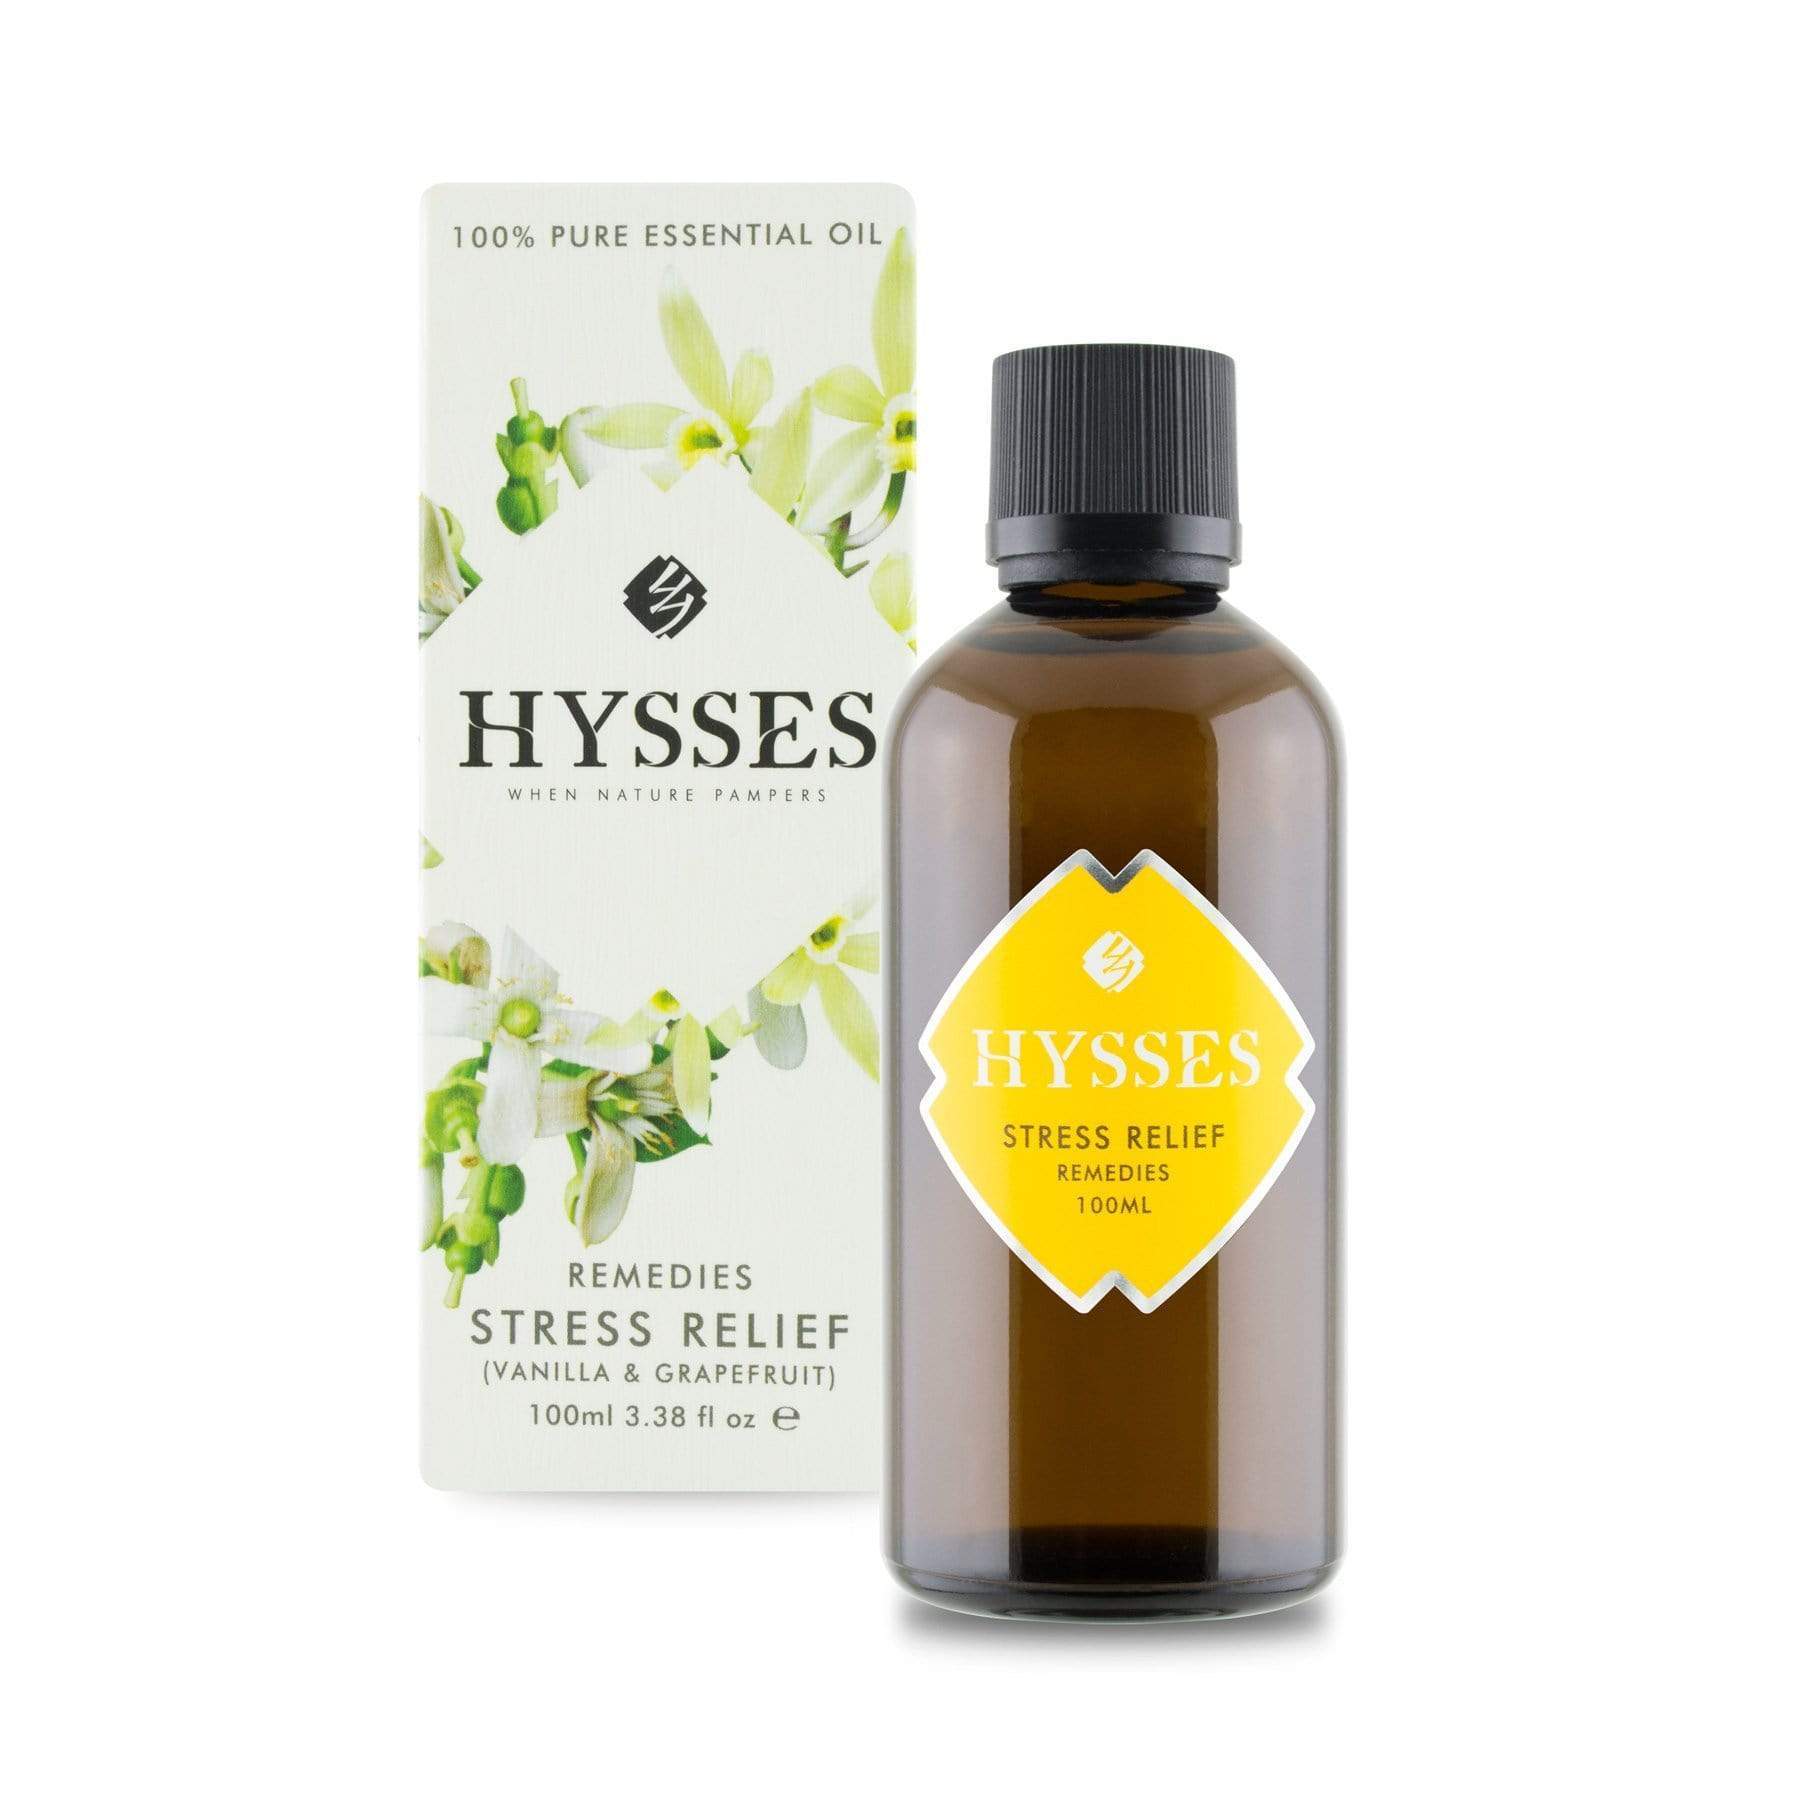 Hysses Essential Oil 10ml Remedies, Stress Relief